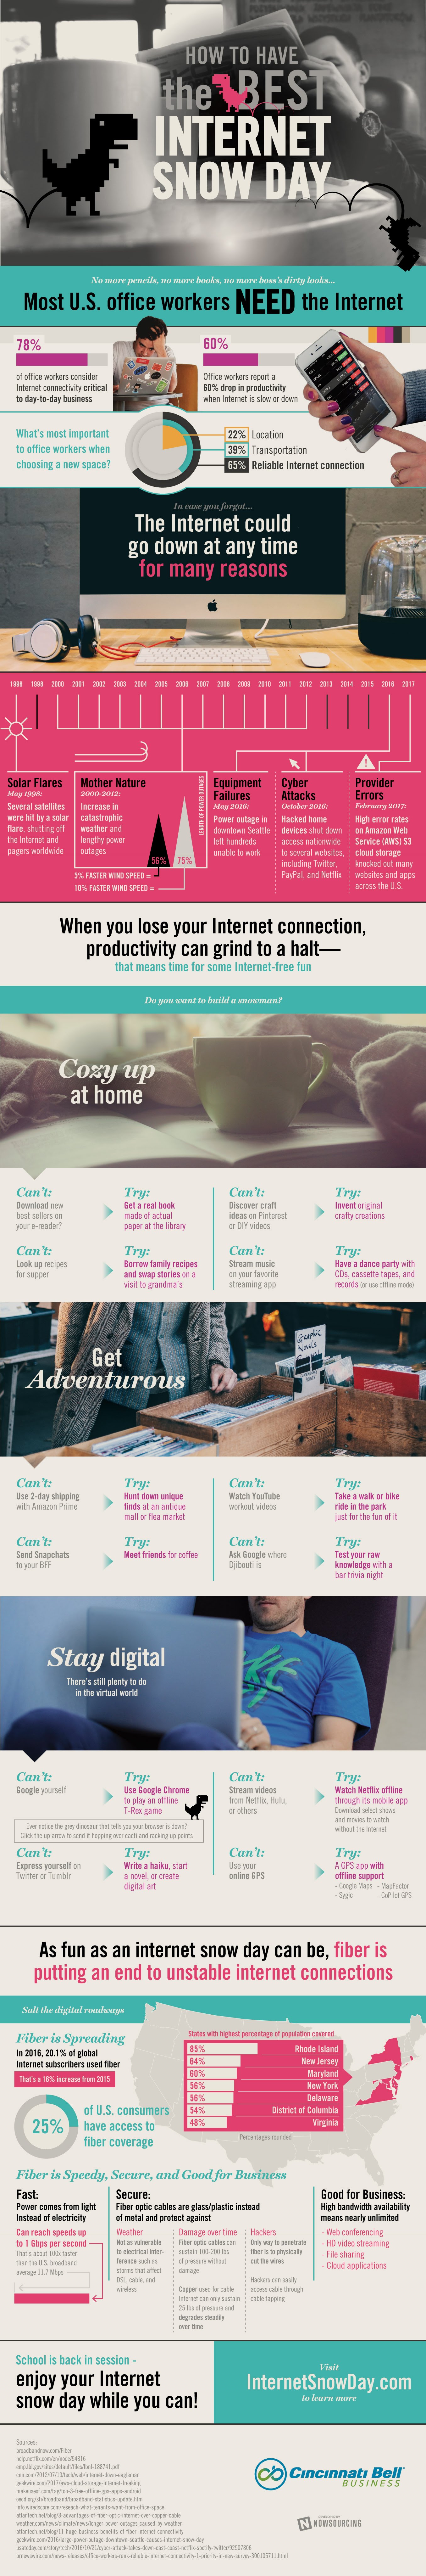 How To Have The Best Internet Snow Day - #infographic